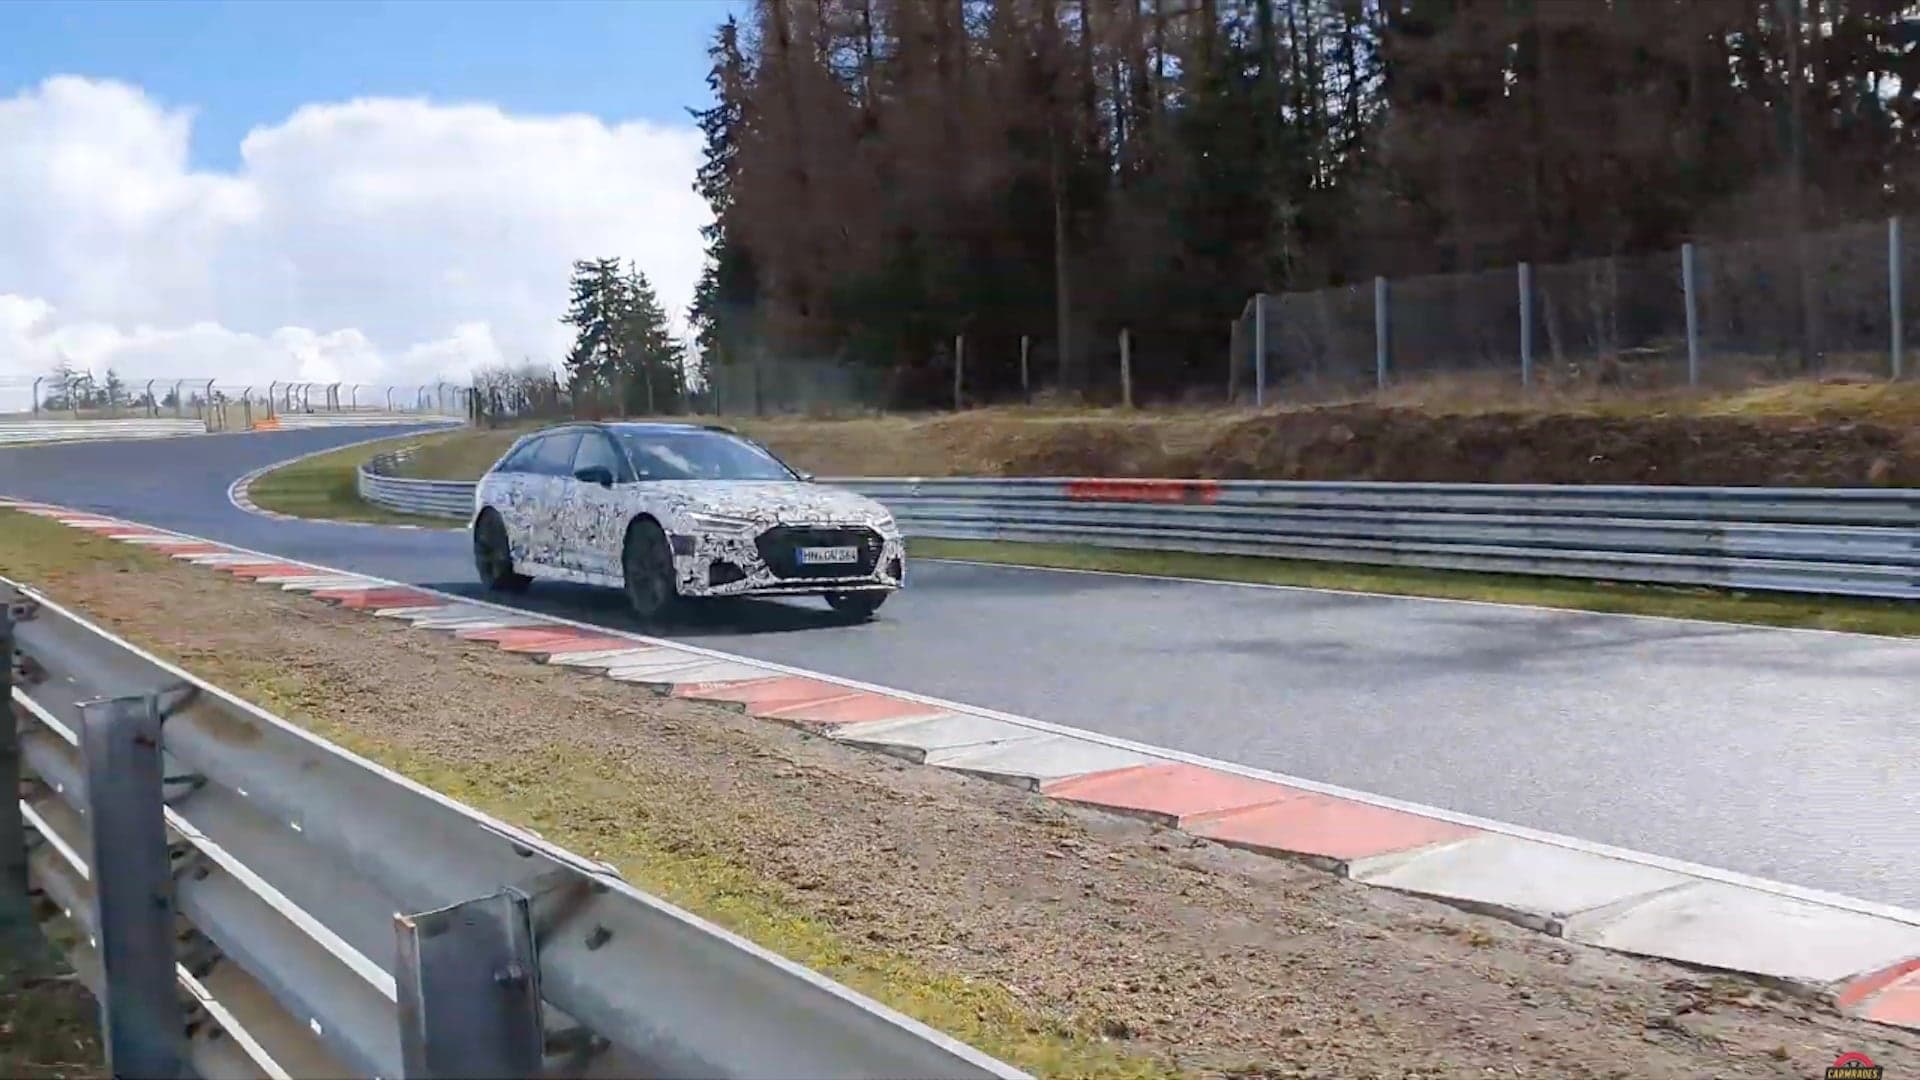 Listen to the Next-Gen Audi RS6 Avant Flexing Its Glorious V8 at the Nürburgring